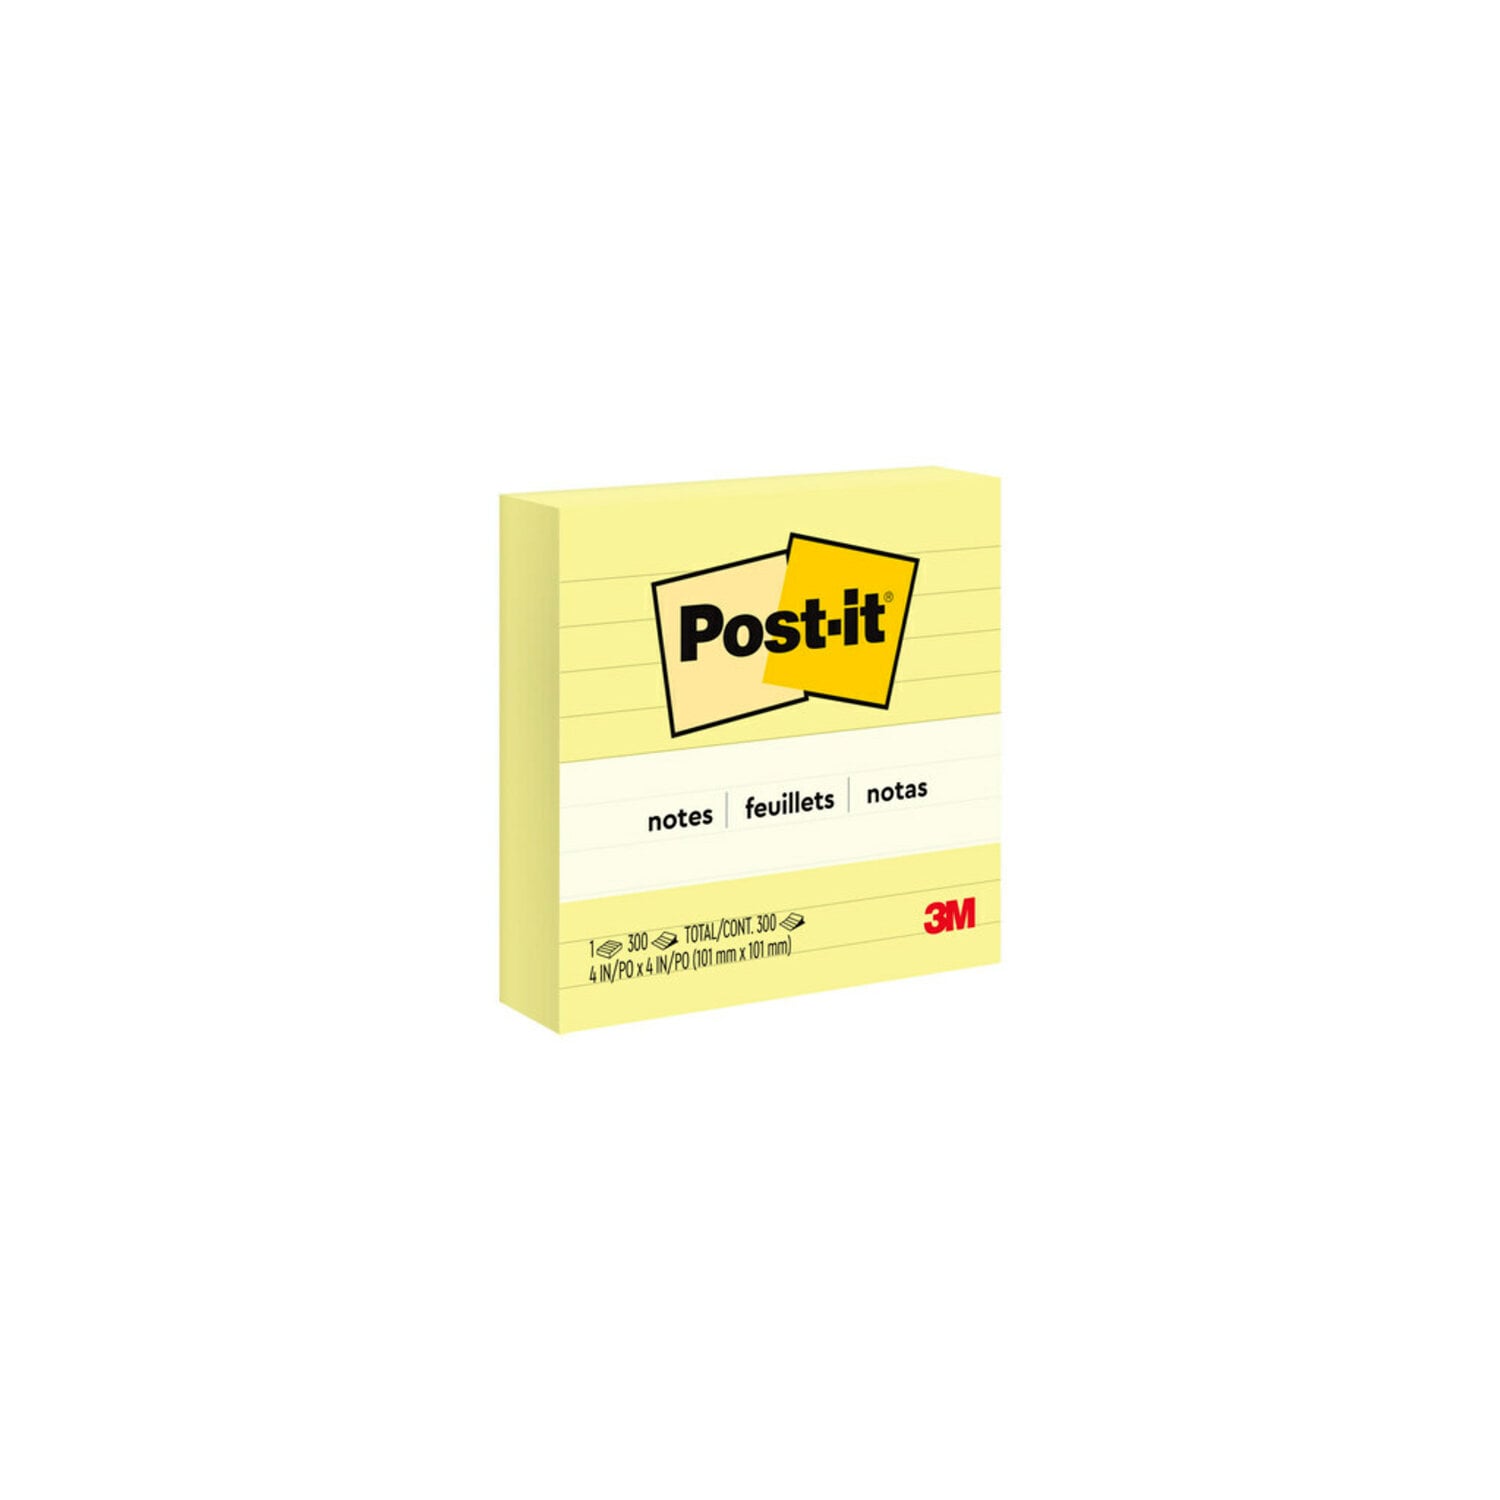 7100137926 - Post-it Notes 675-YL, 4 in x 4 in, Canary Yellow Lined